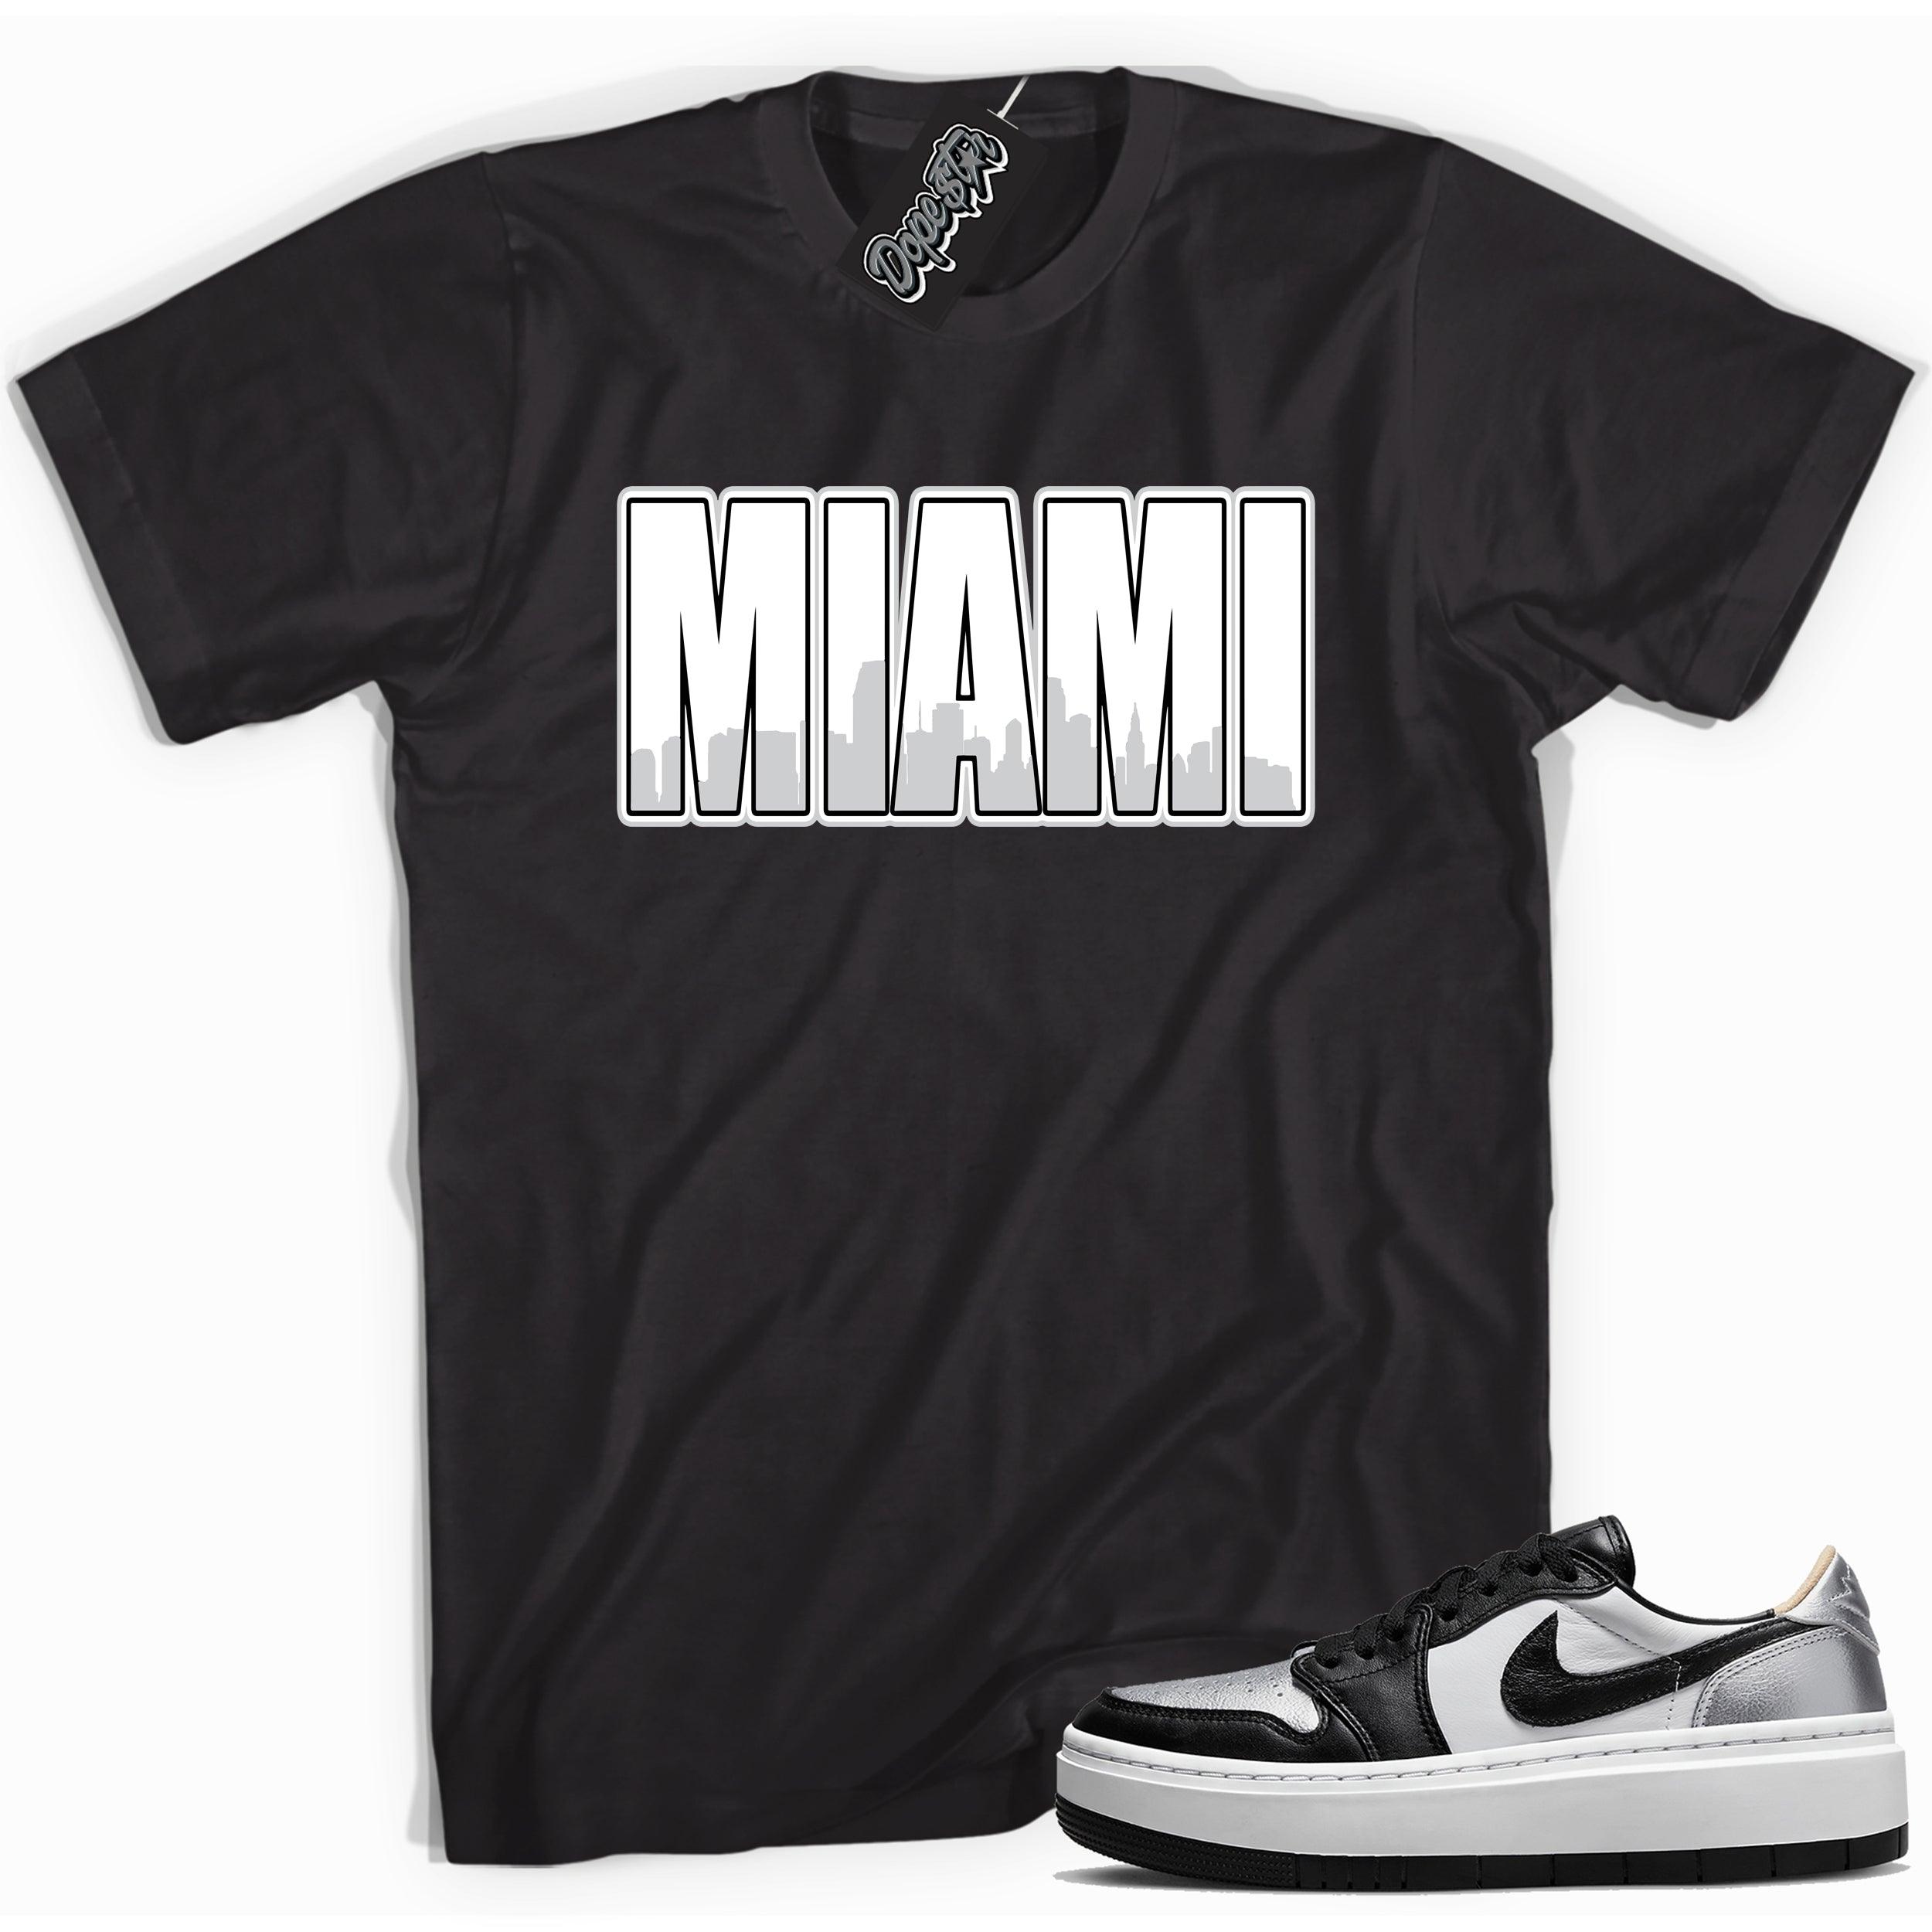 Cool black graphic tee with 'miami' print, that perfectly matches Air Jordan 1 Elevate Low SE Silver Toe sneakers.